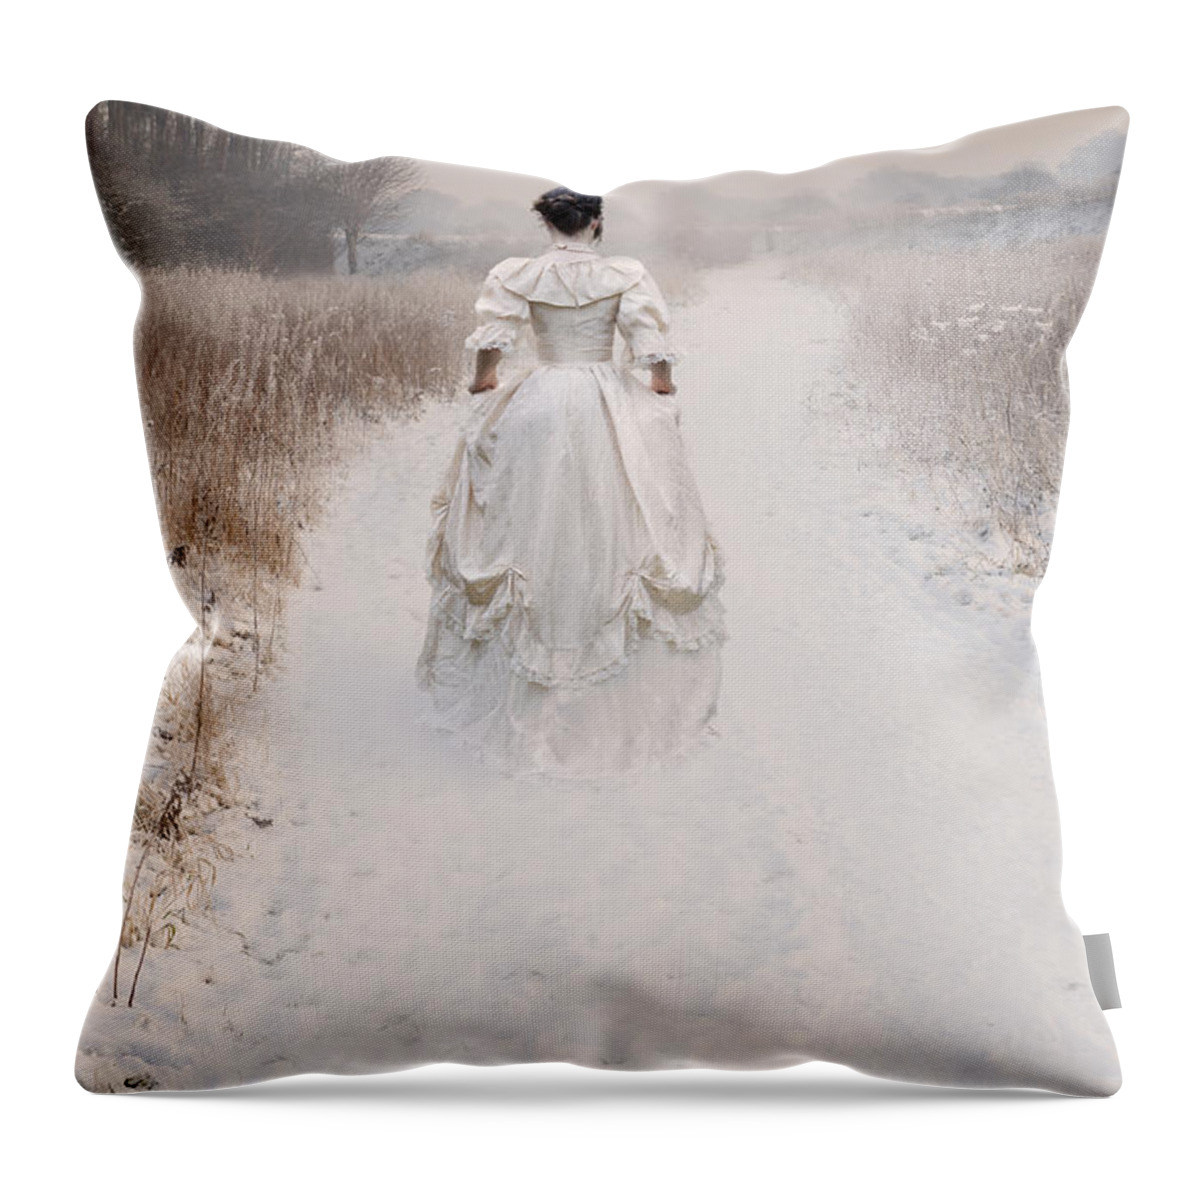 Woman Throw Pillow featuring the photograph Victorian Woman Walking Through A Winter Meadow by Lee Avison